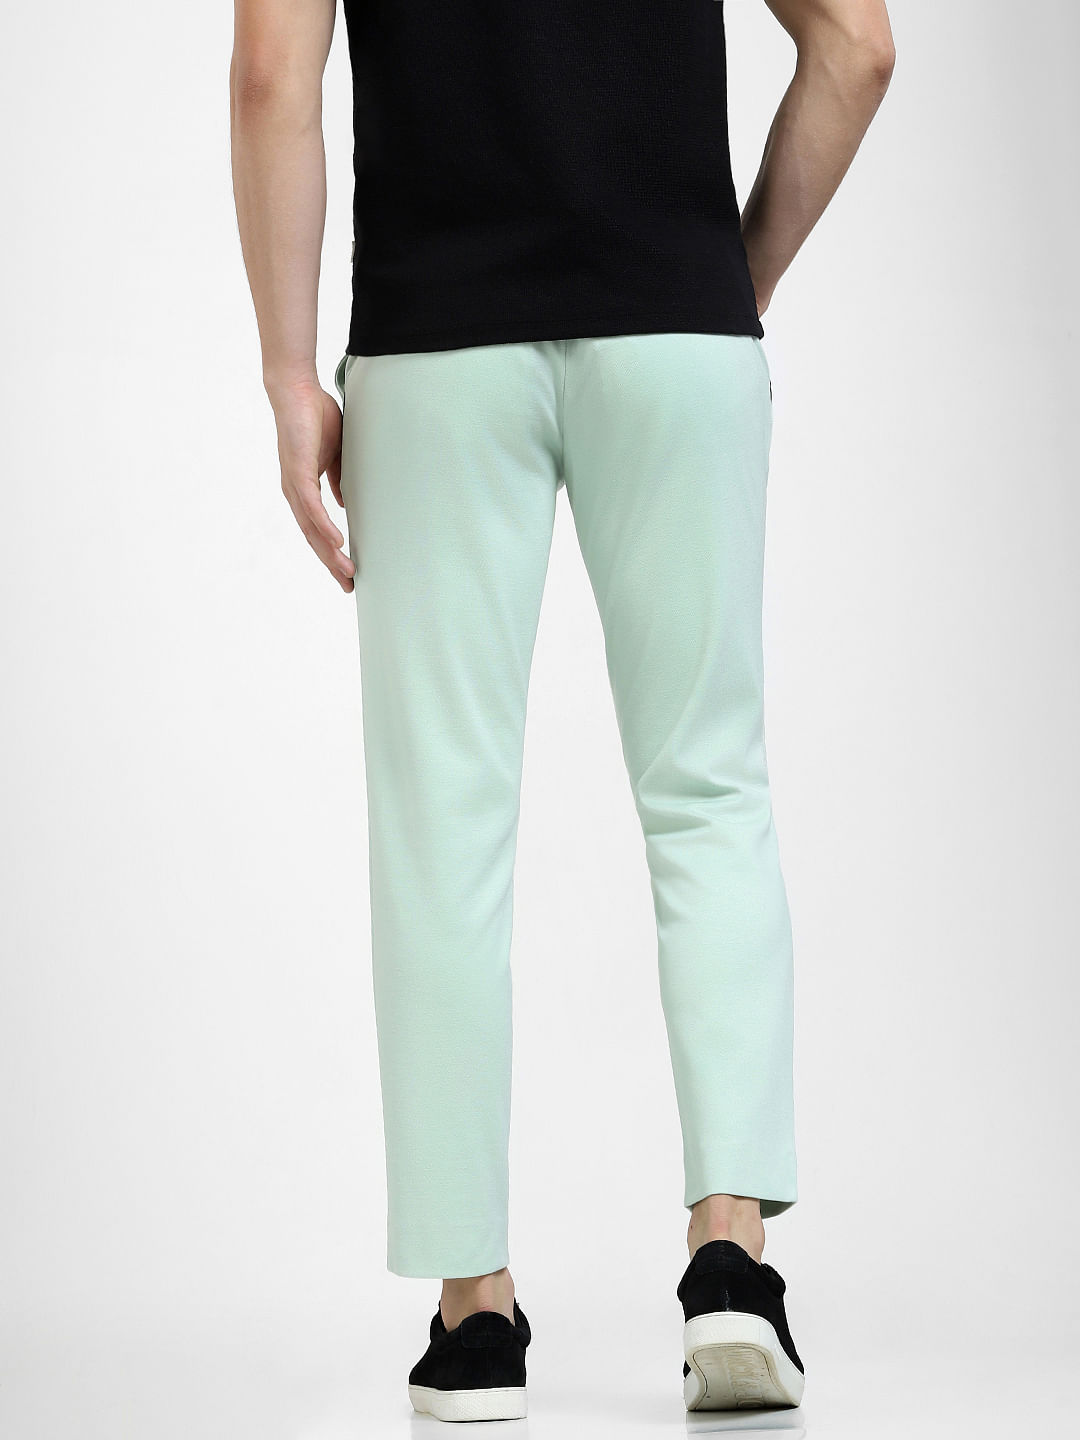 Buy Labroz Mens Slim Fit Casual Solid Trousers100 Pure CottonLight Green  Colour at Amazonin